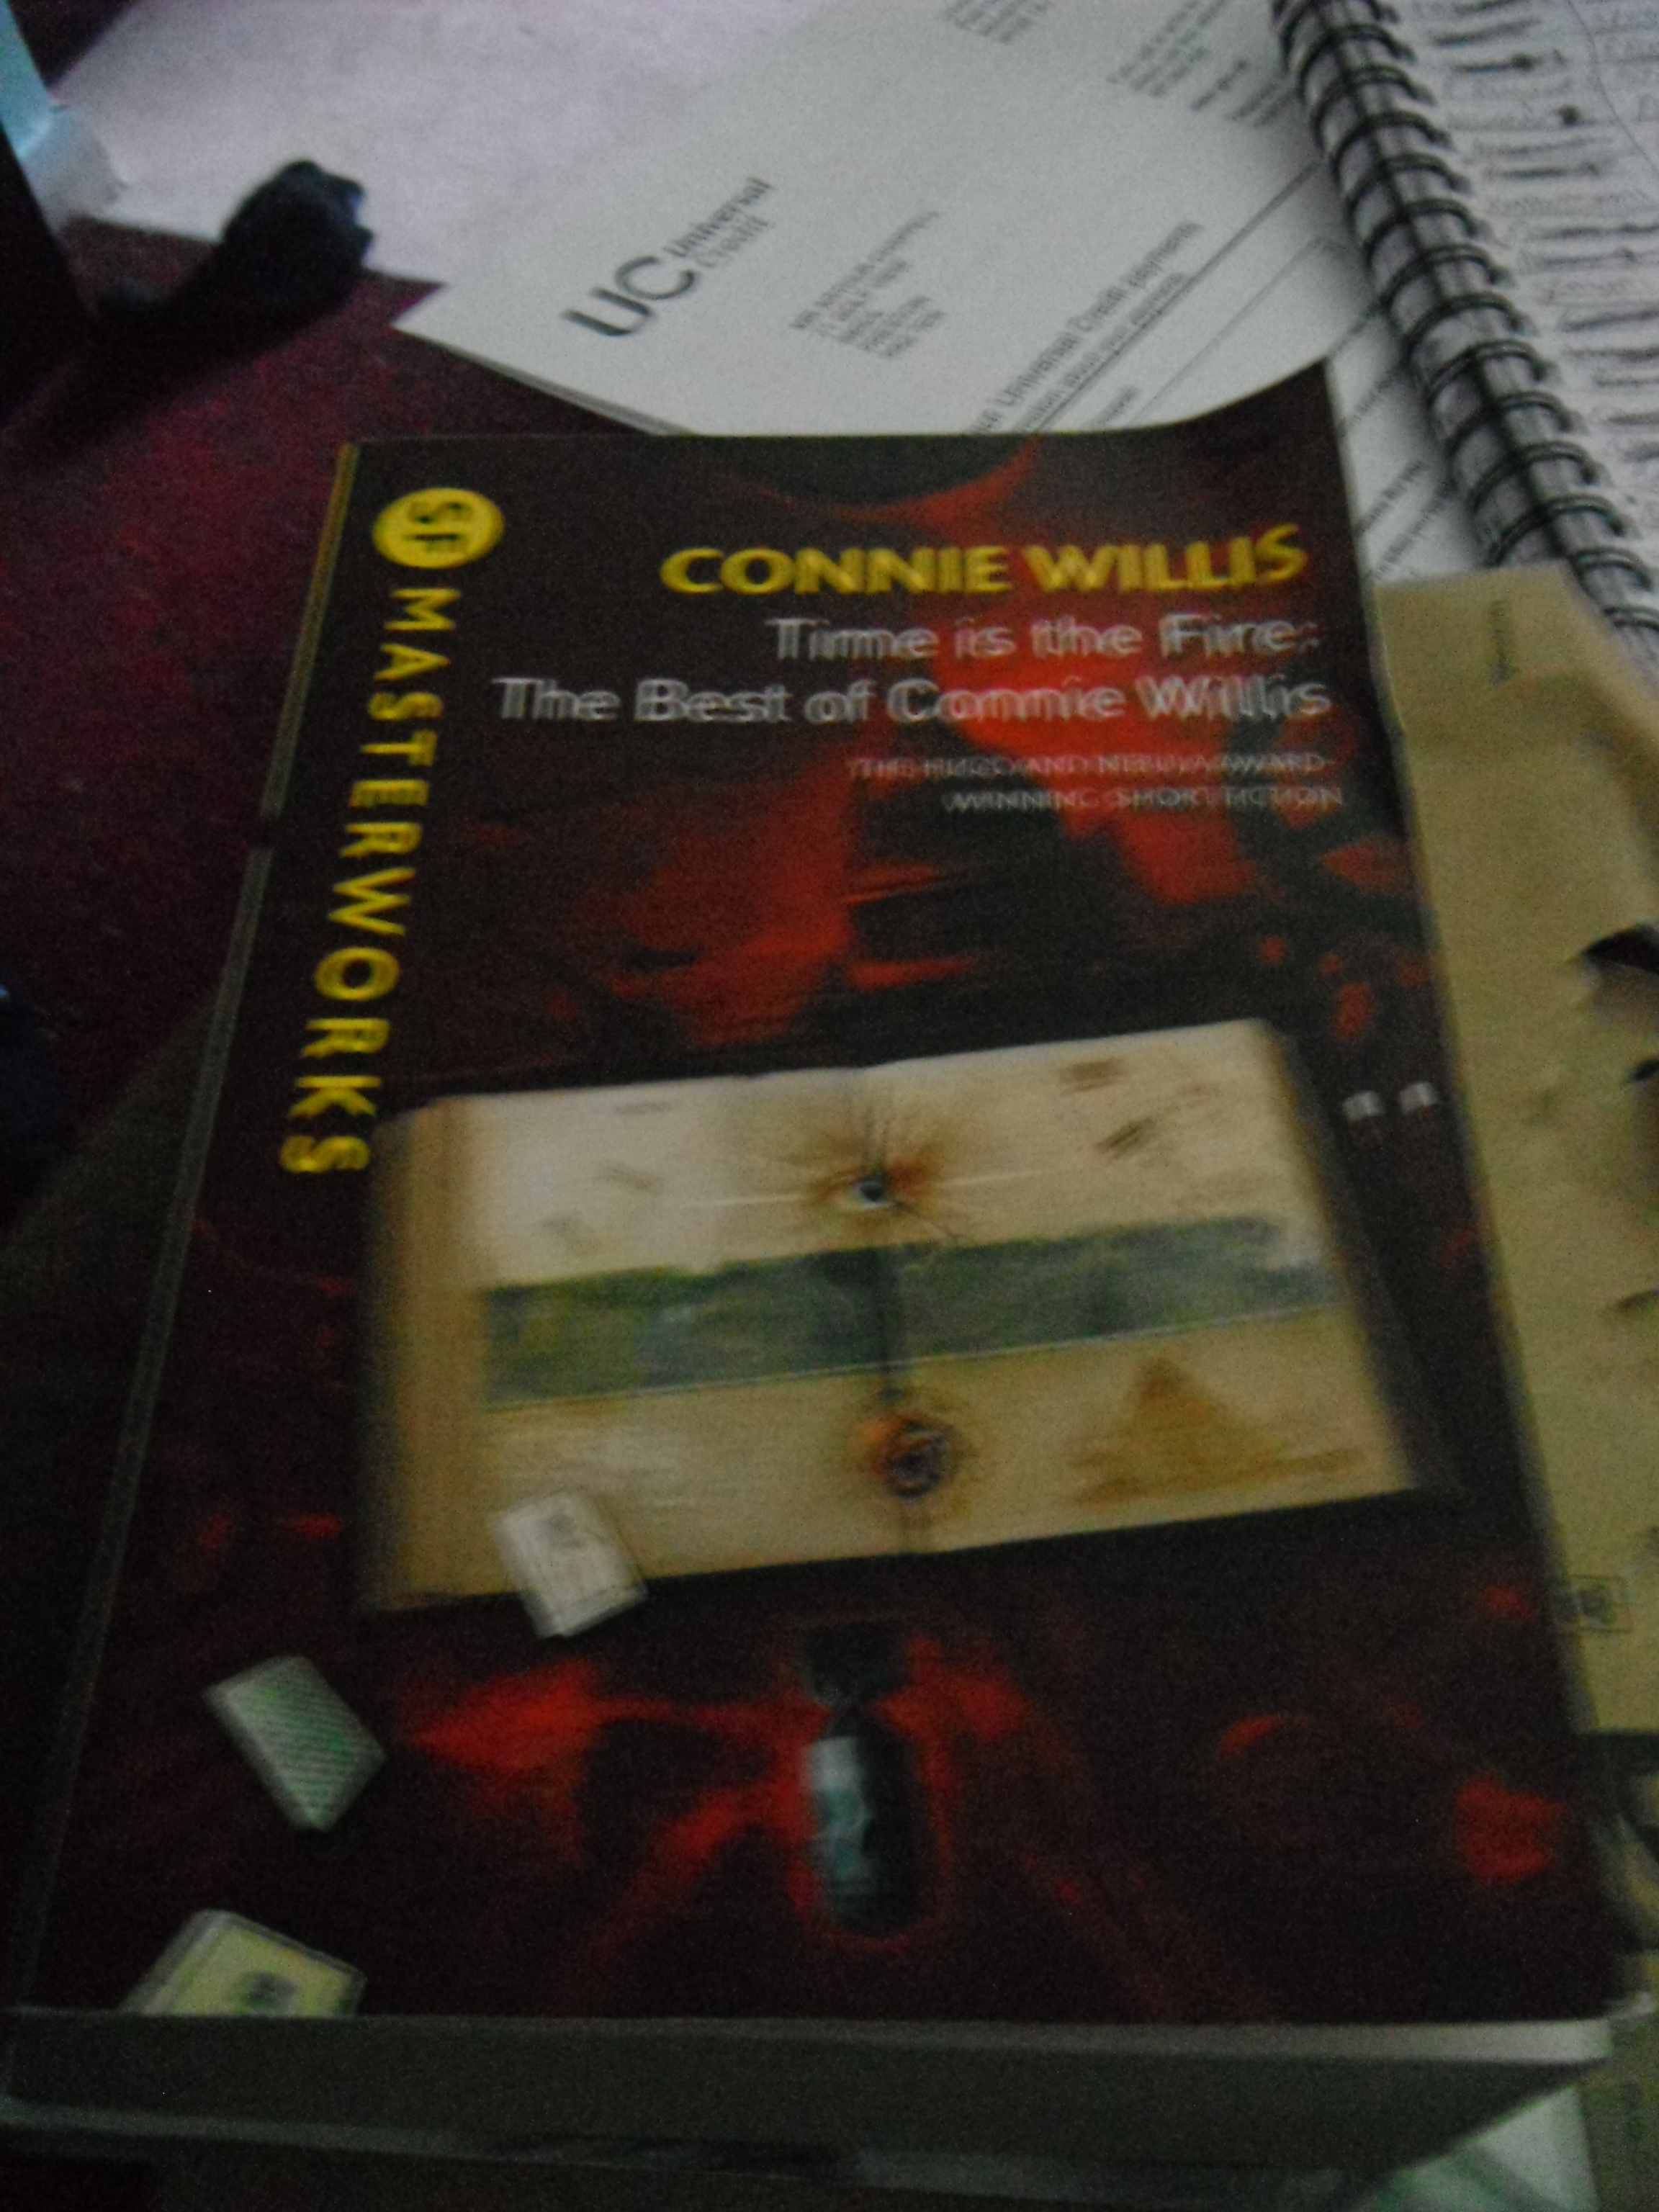 Photo taken by me – Book Cover to Connie Willis’s Time Is The Fire